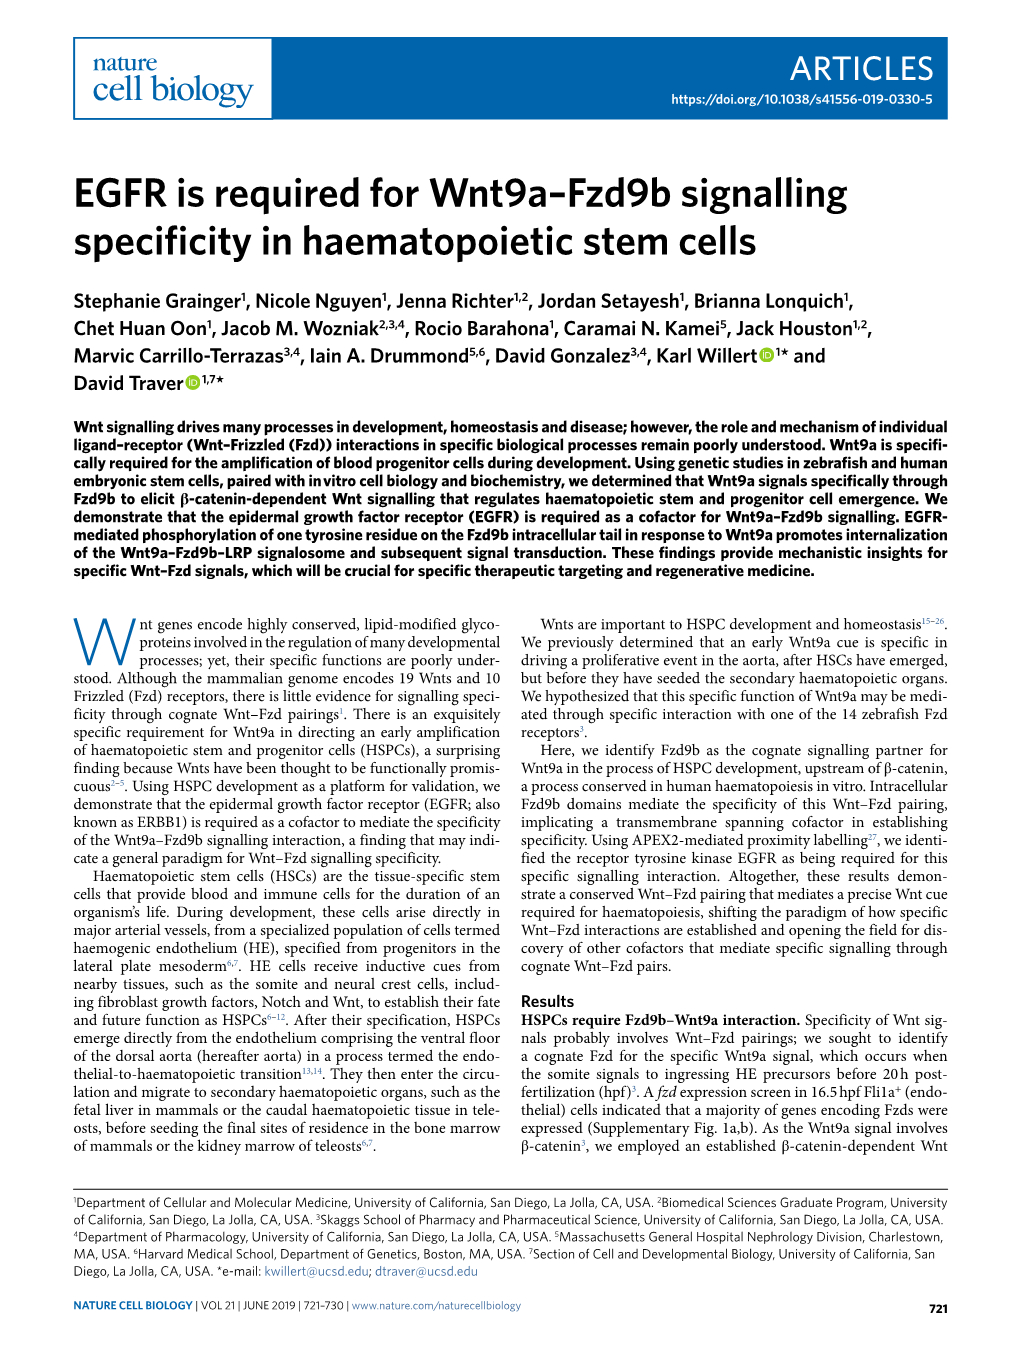 EGFR Is Required for Wnt9a–Fzd9b Signalling Specificity in Haematopoietic Stem Cells